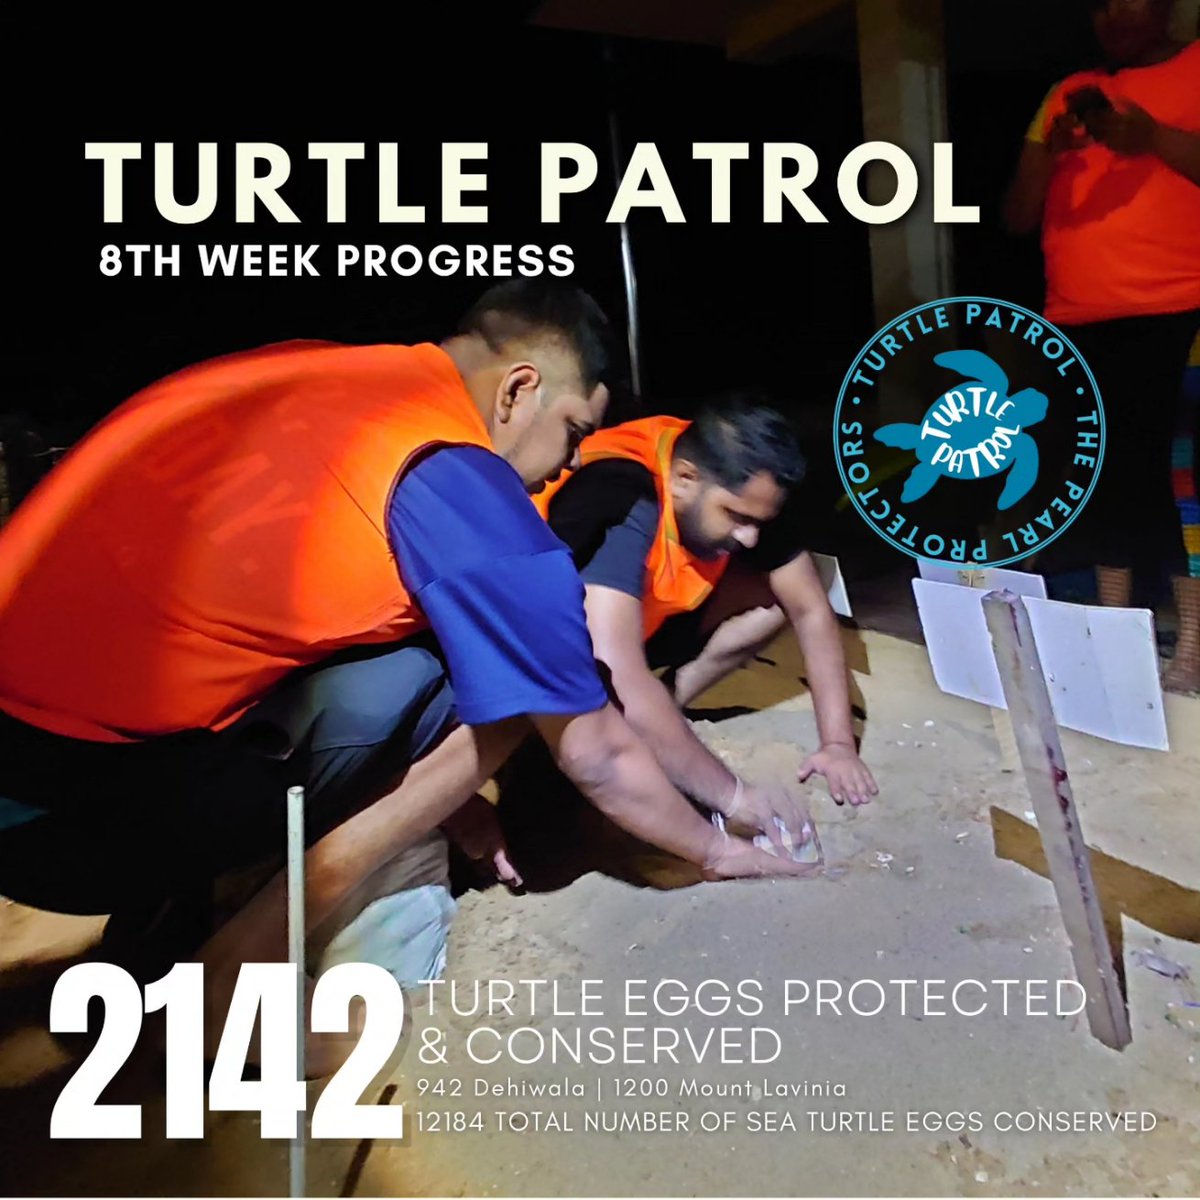 We have completed 2 months of Turtle Patrolling During 8th week, 2142 eggs were ex-situ conserved in Mt Lavinia & Dehiwala. This is the most number of turtle eggs conserved during a week. 12184 eggs have been conserved during the total duration of Patrolling #turtlepatrol